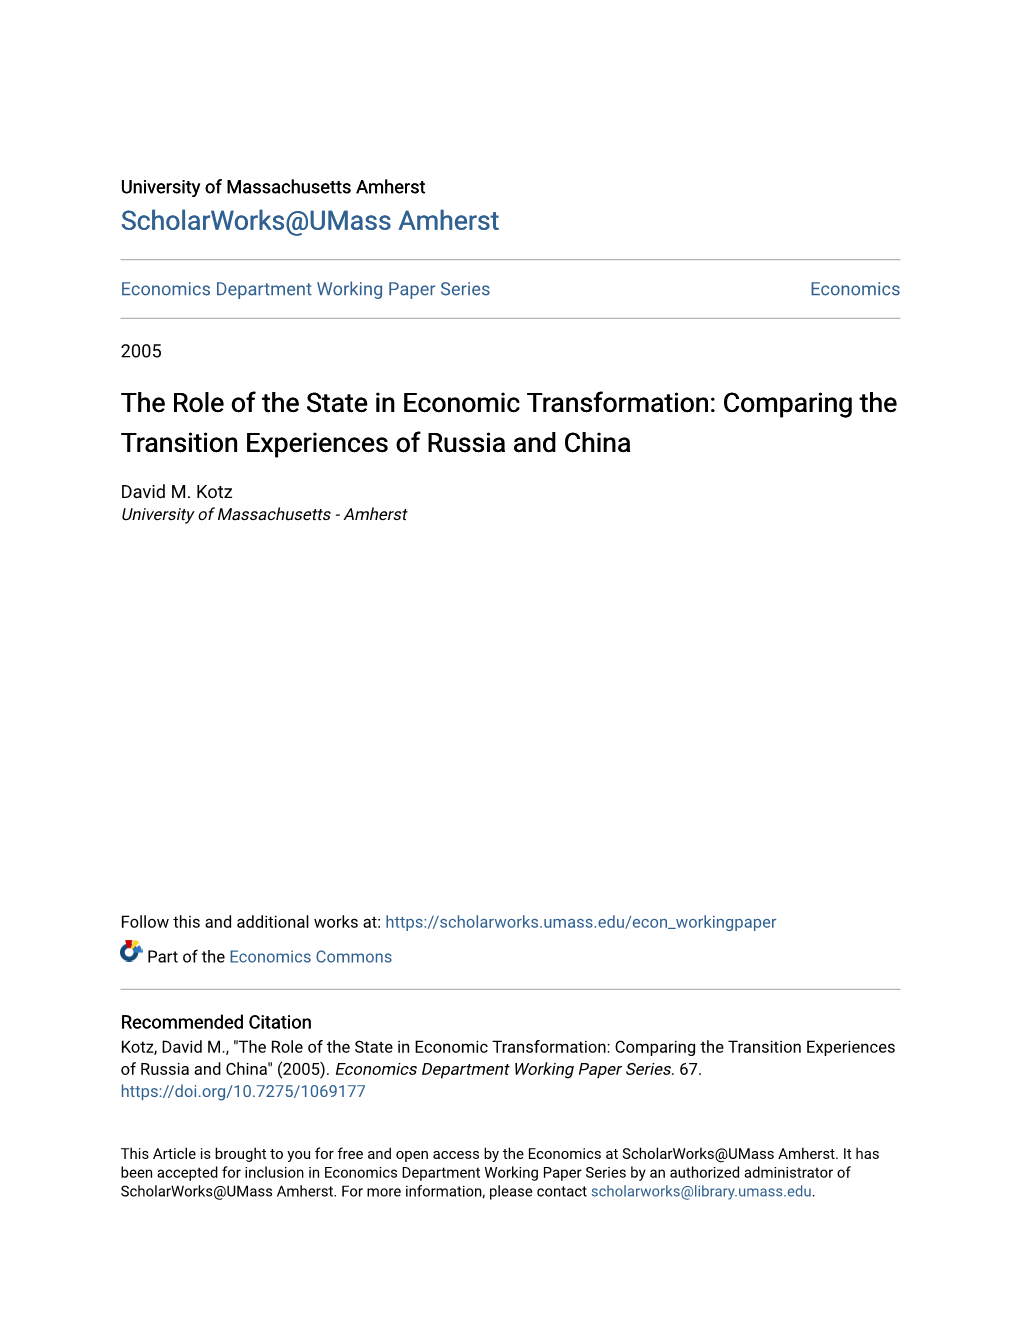 The Role of the State in Economic Transformation: Comparing the Transition Experiences of Russia and China